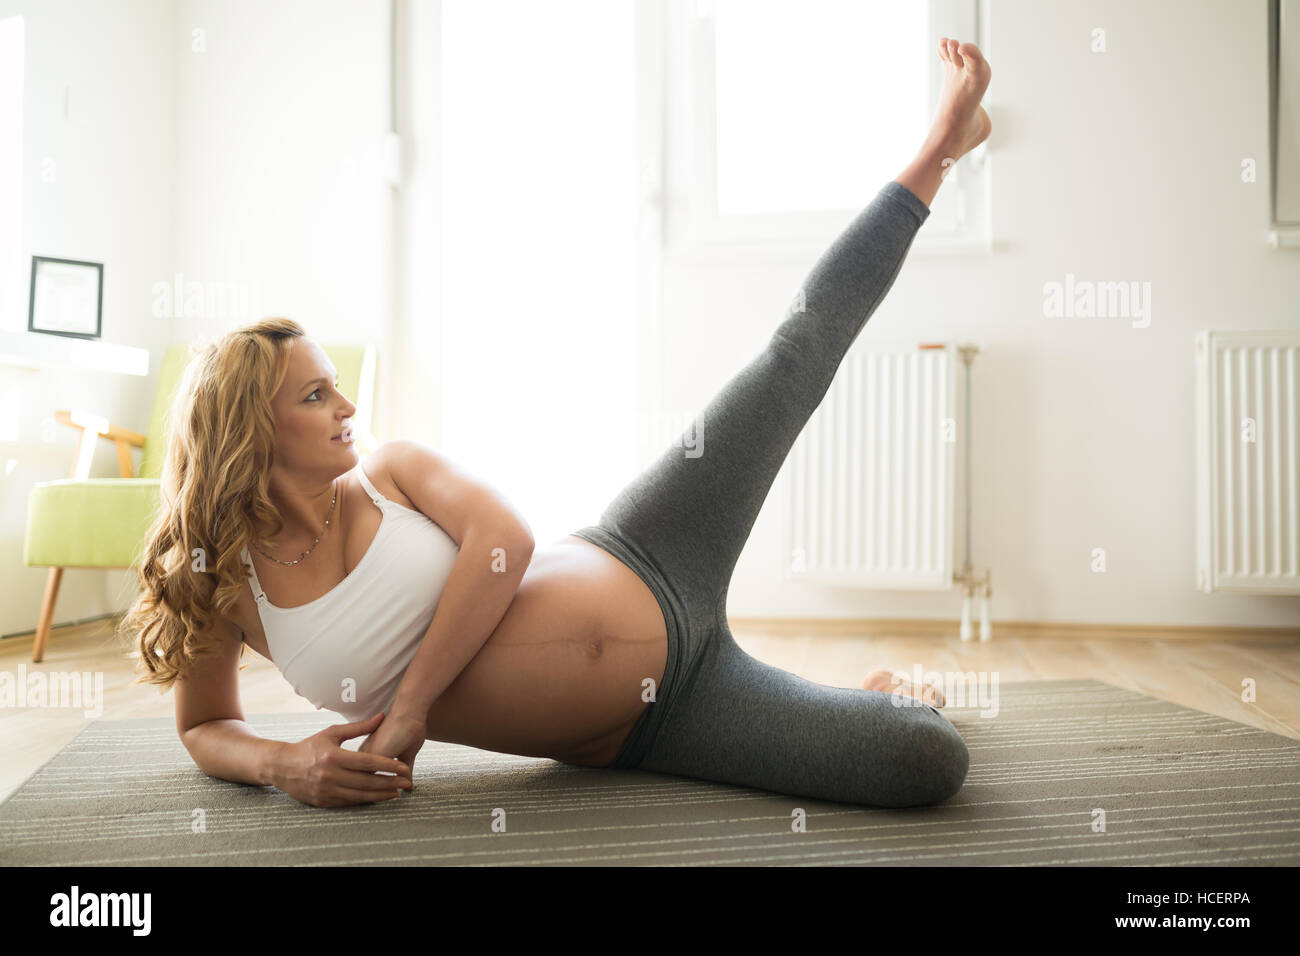 Pregnant woman staying active and healthy at home Stock Photo